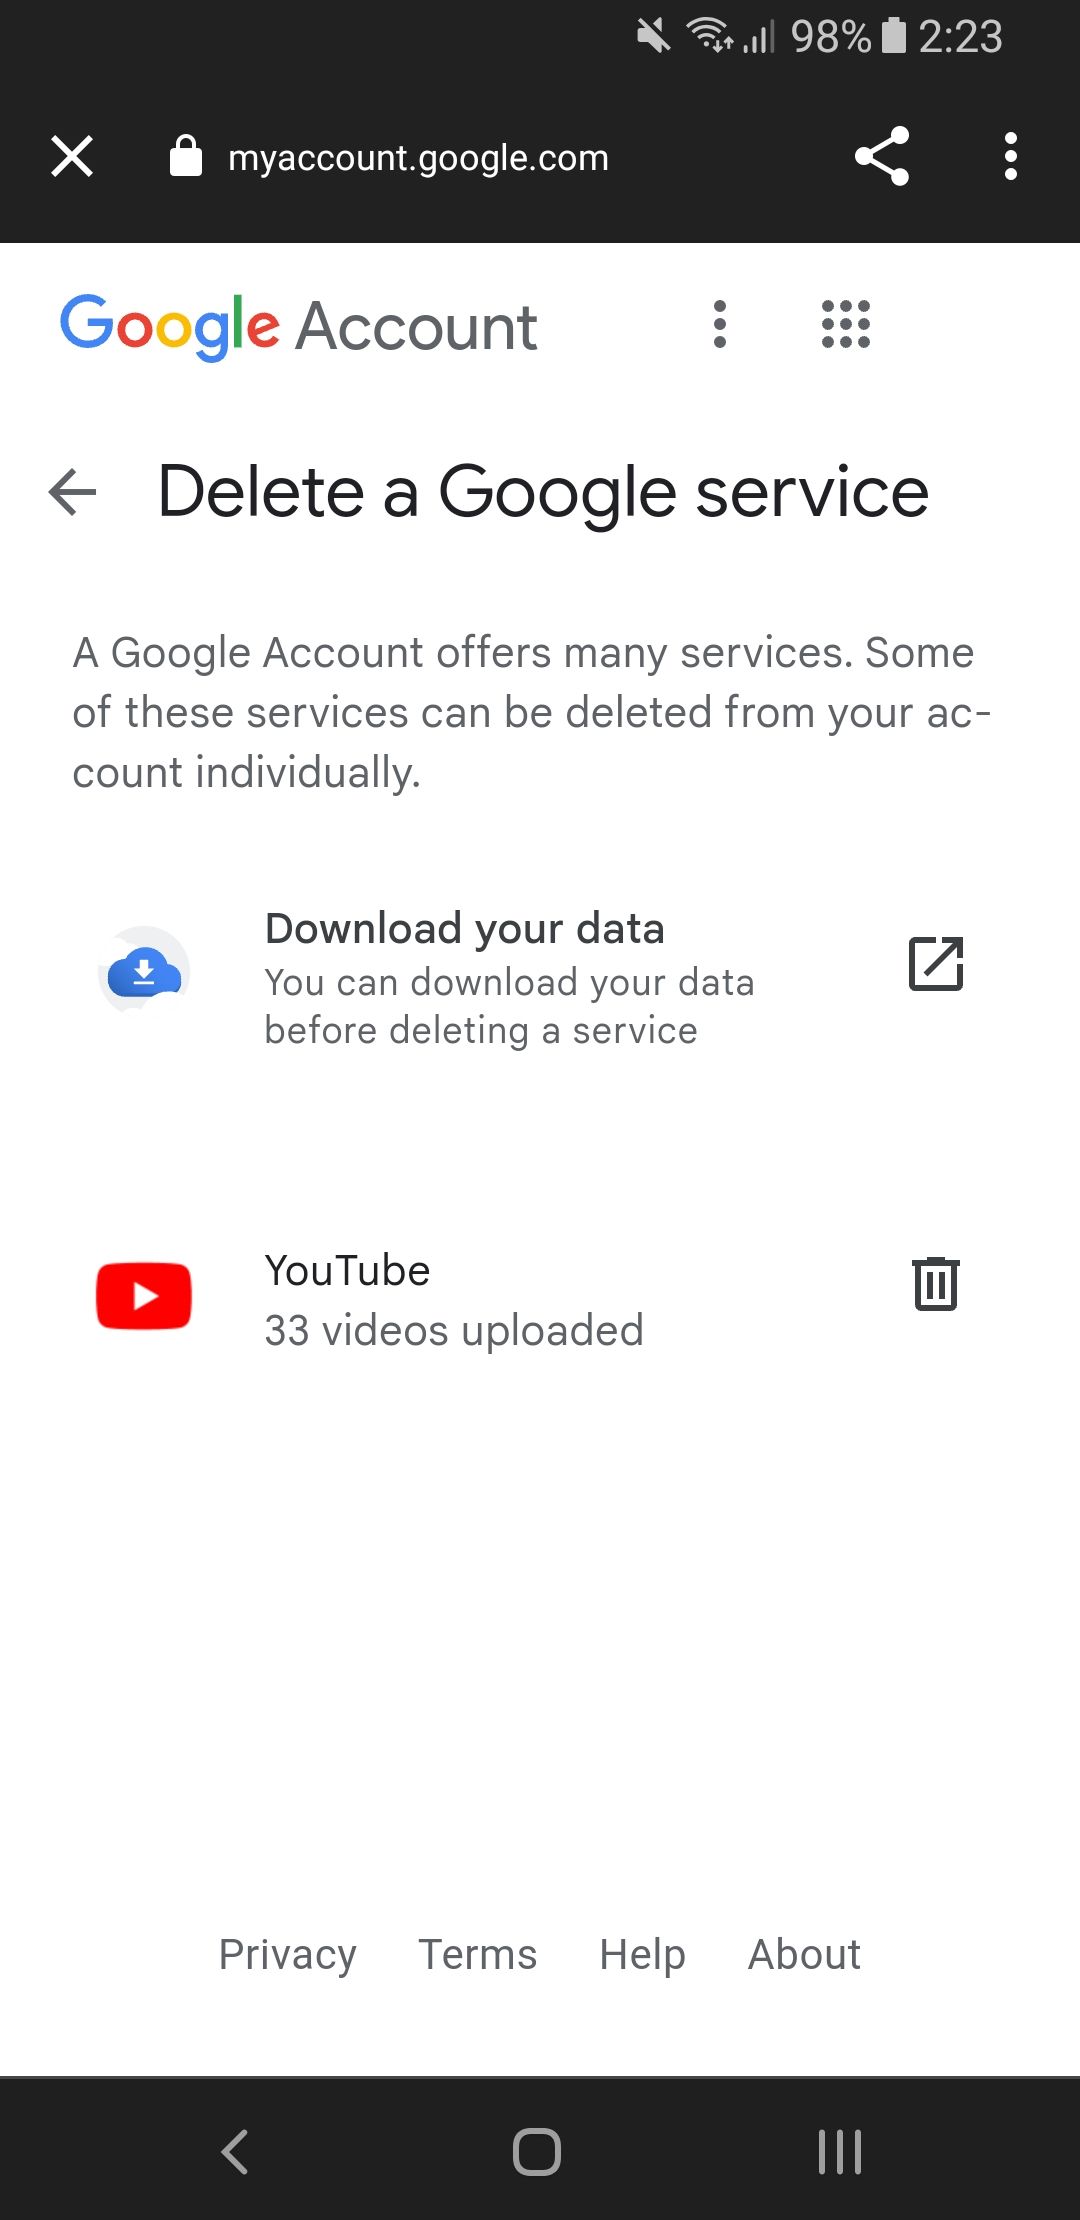 google account delete a google service on android